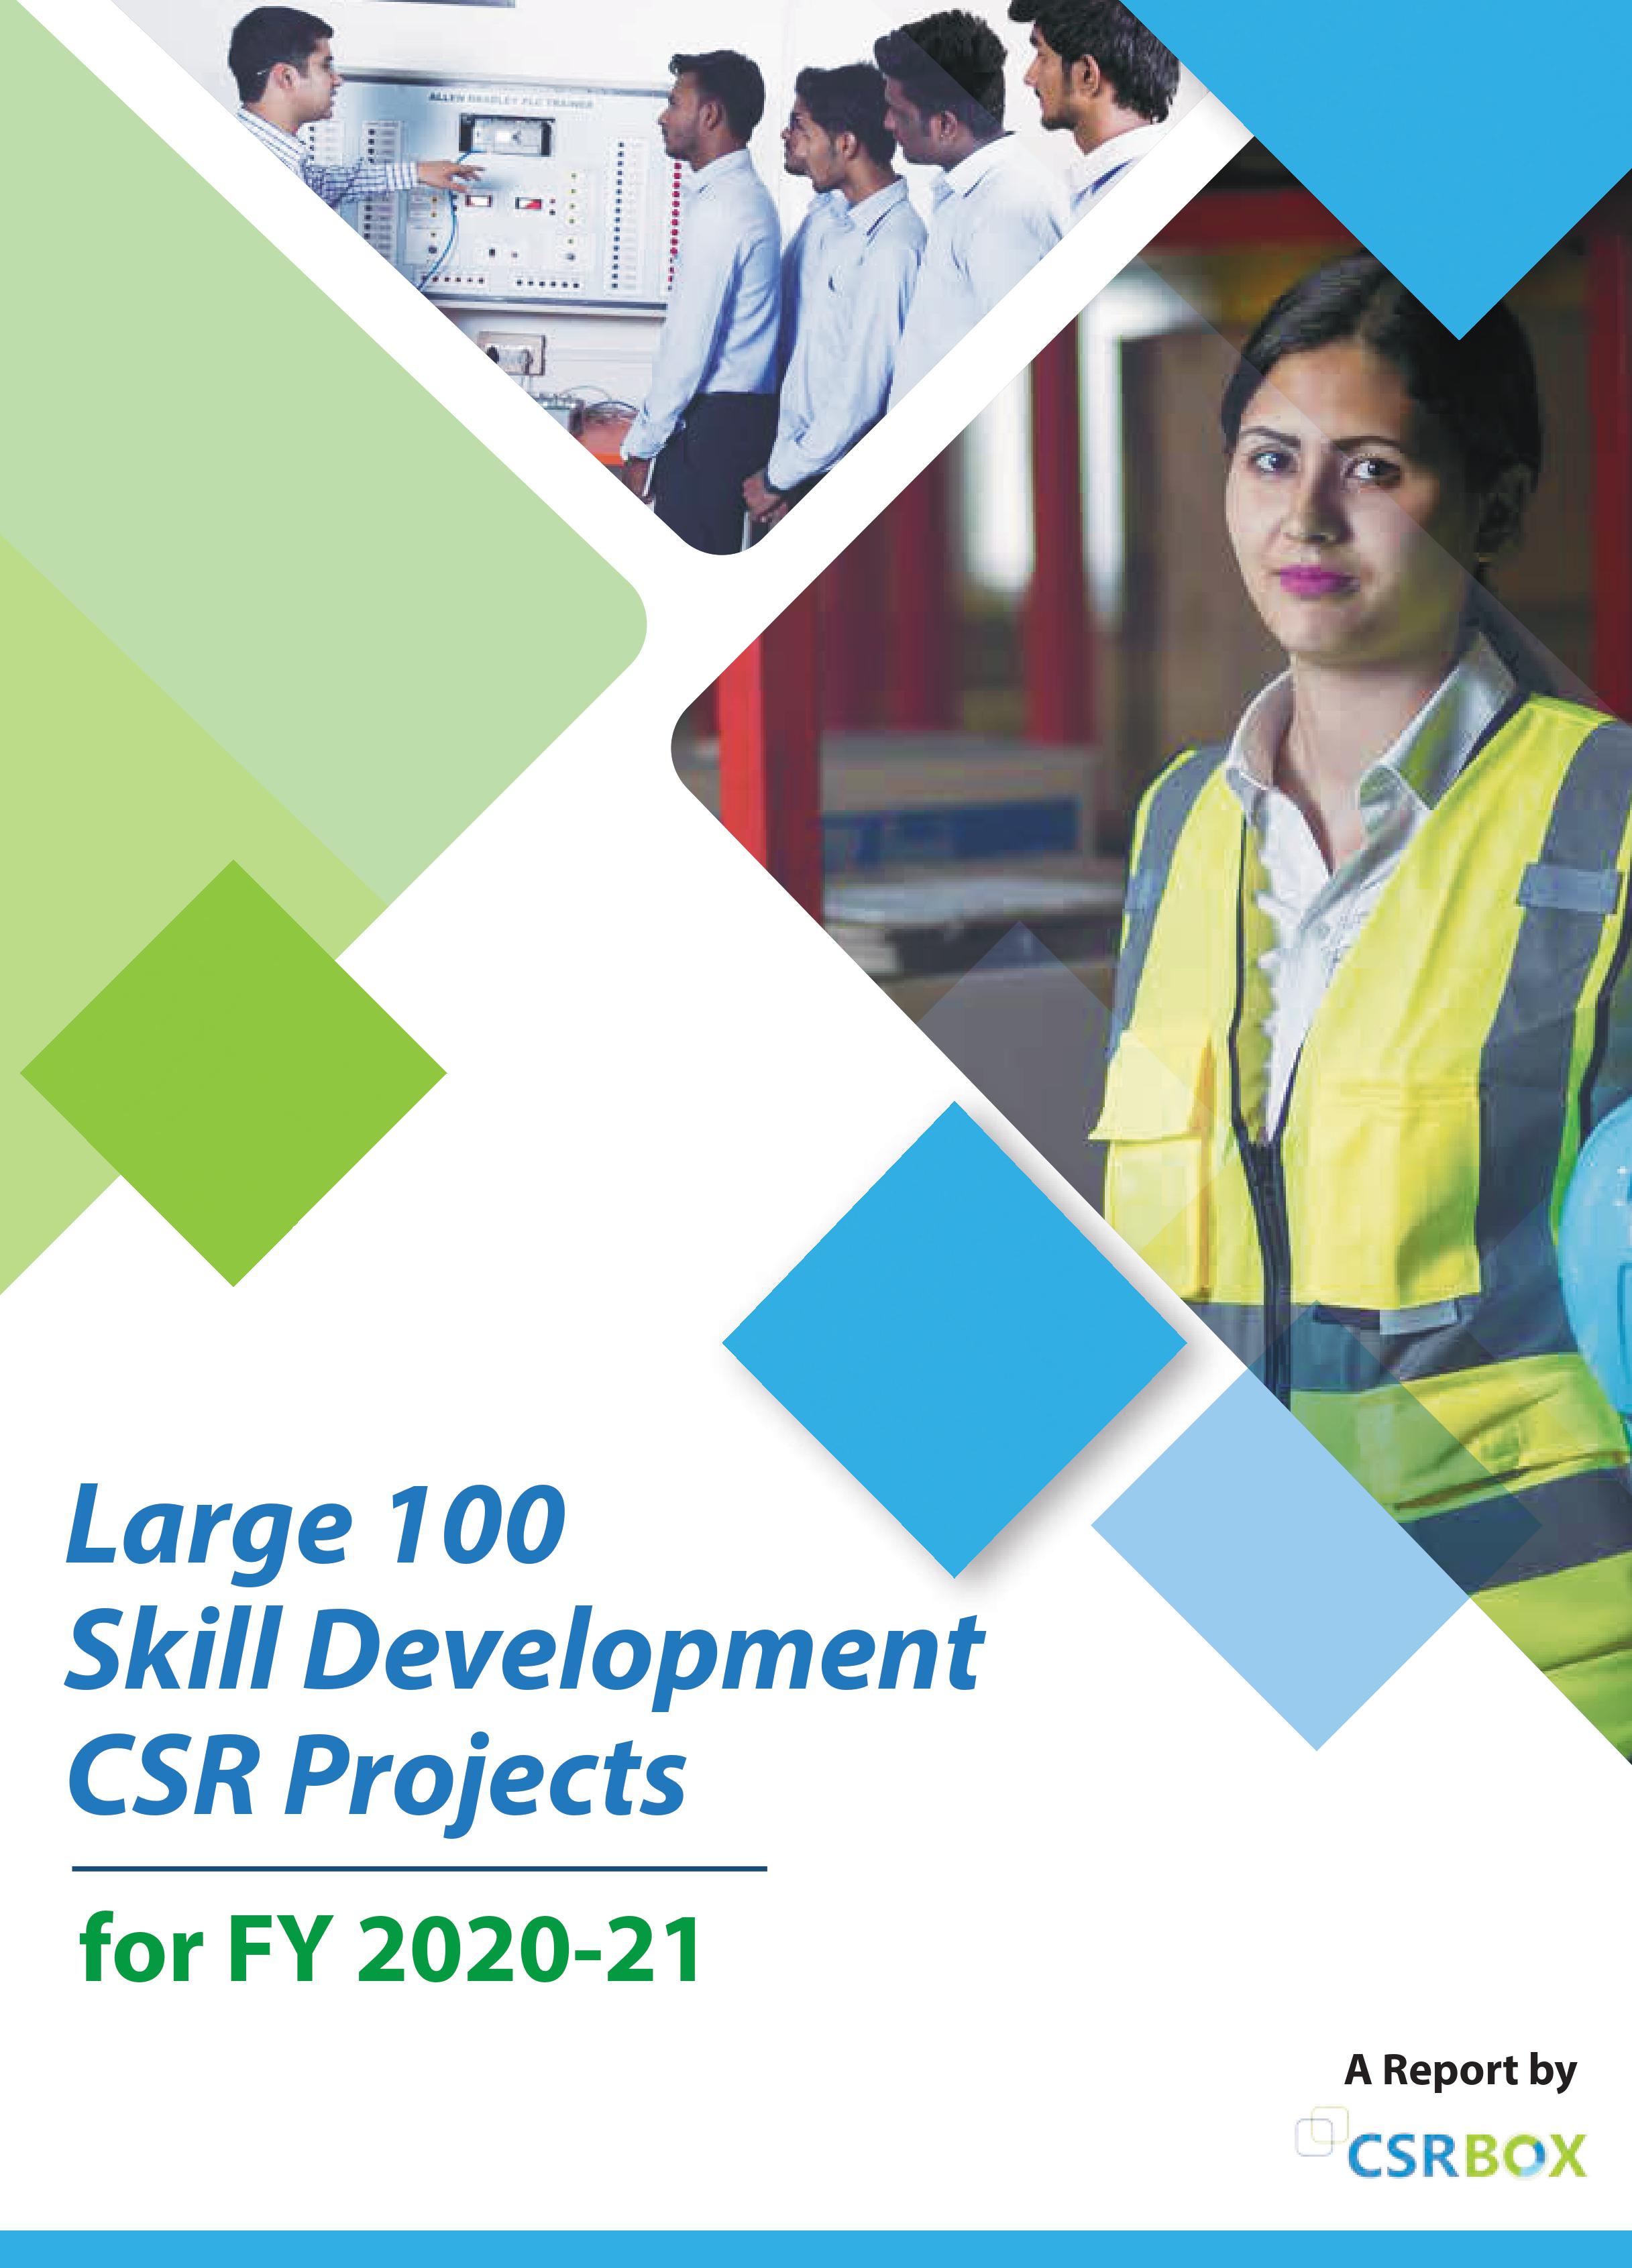 Large 100 Skill Development CSR Projects in India FY 2020-21